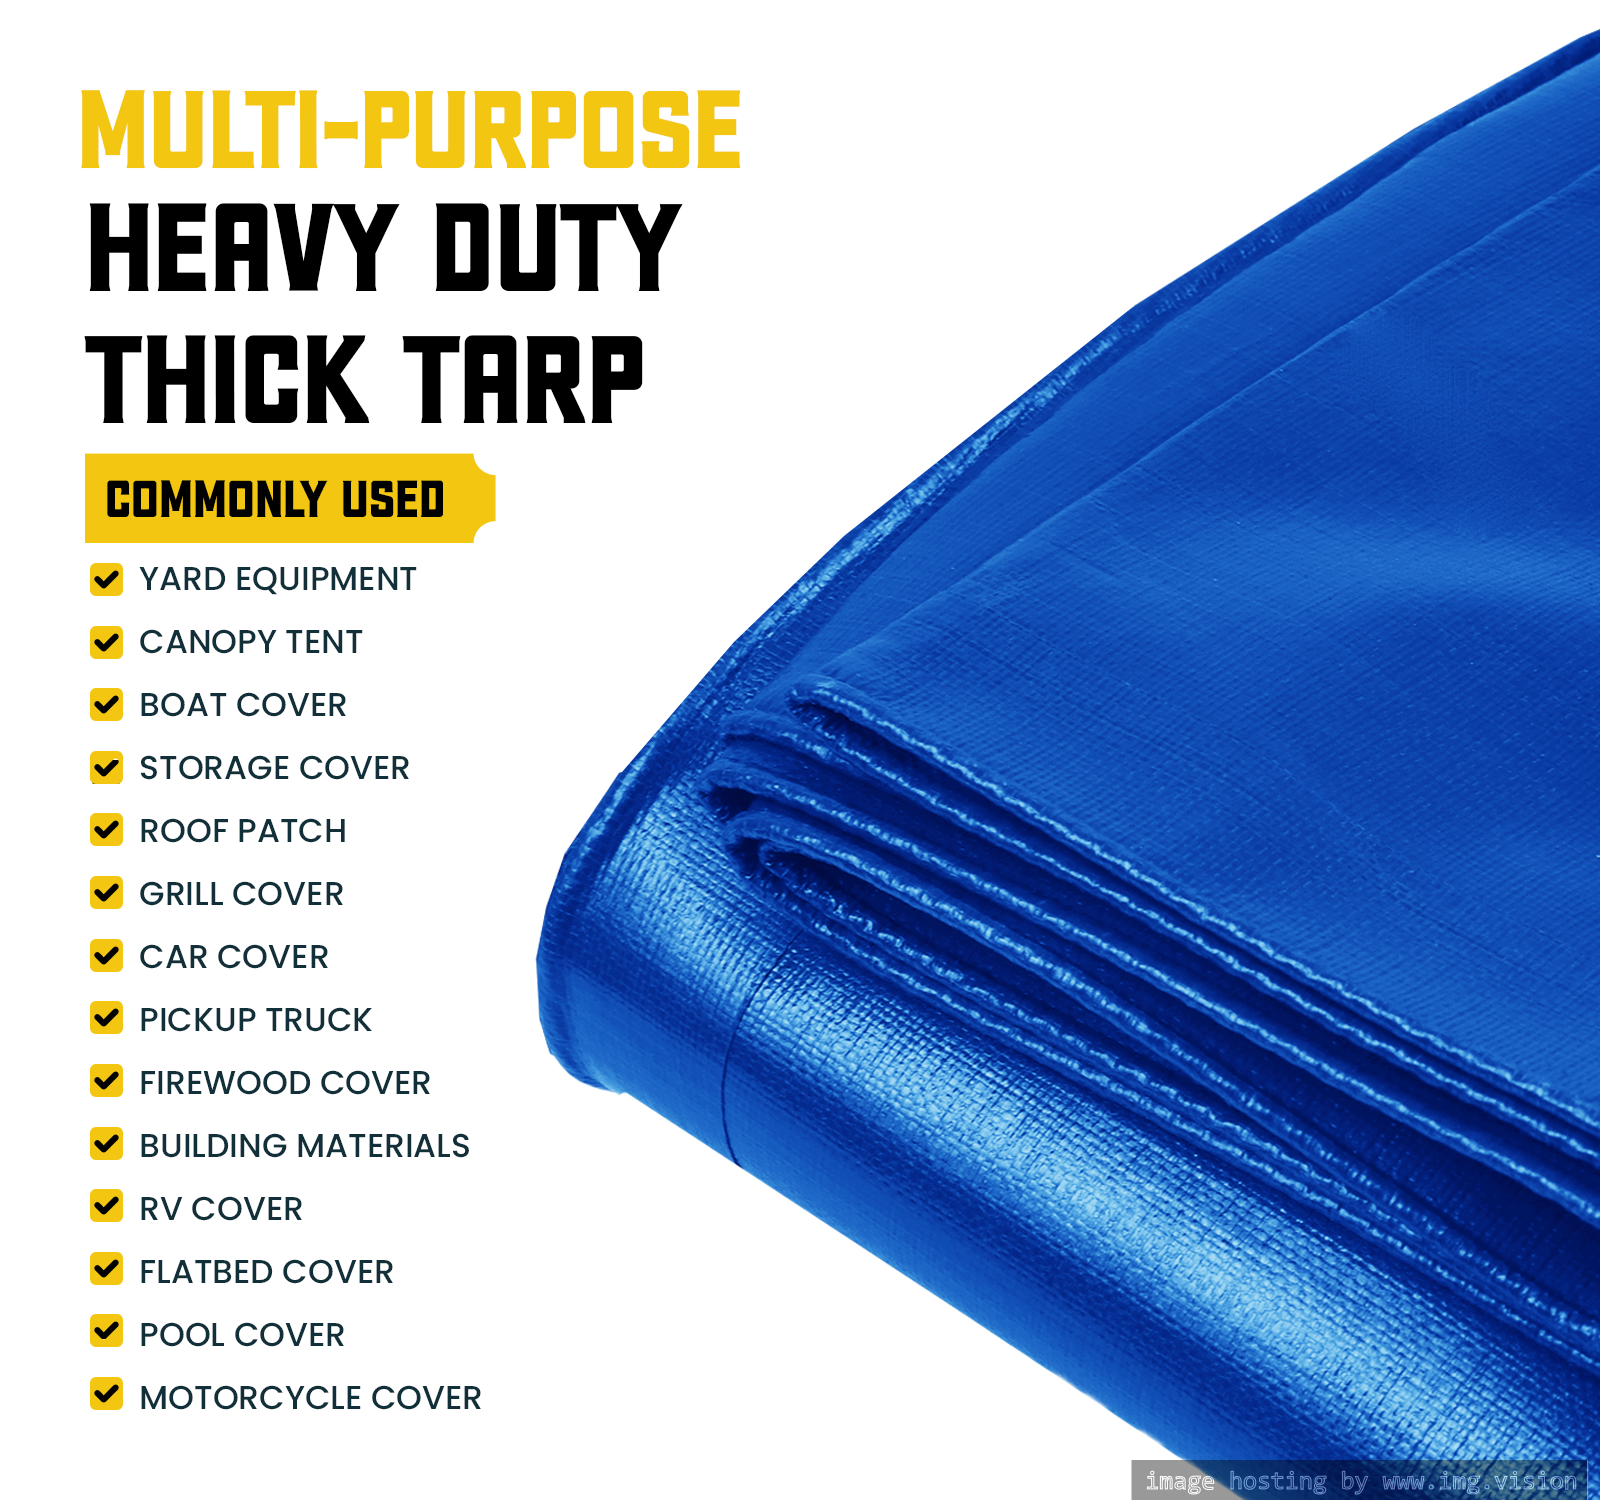 Core Tarps Extreme Heavy Duty 20 Mil Tarp Cover 9′ X 12′ Blue UV Resistant, Rip and Tear Proof.